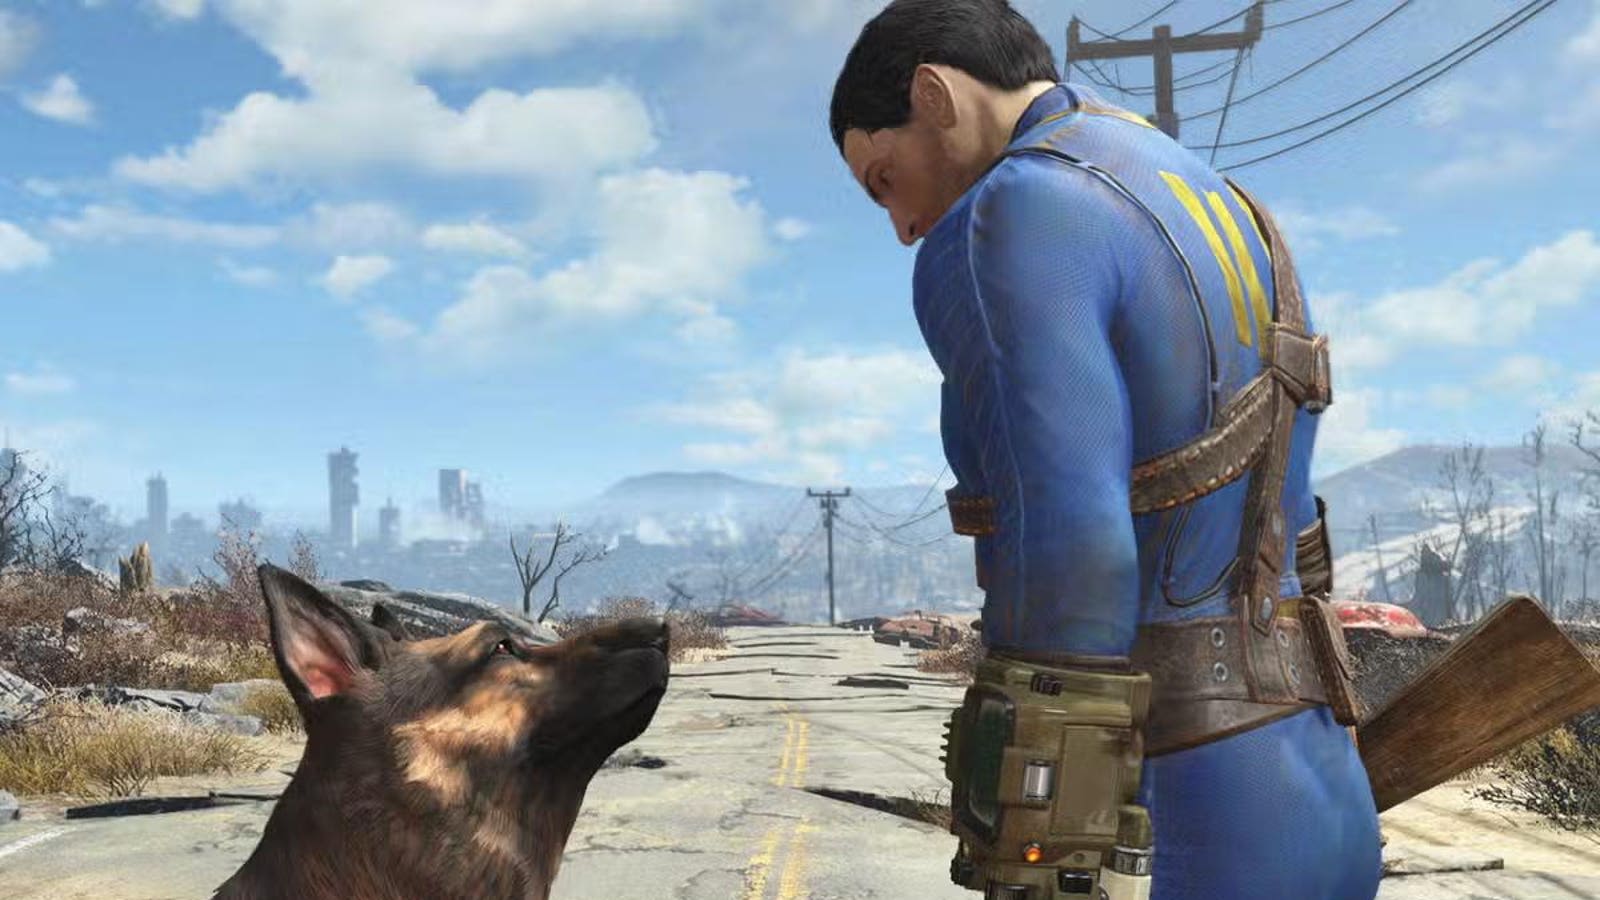 There Is No Great Solution For Xbox And Bethesda’s ‘Fallout’ Problem